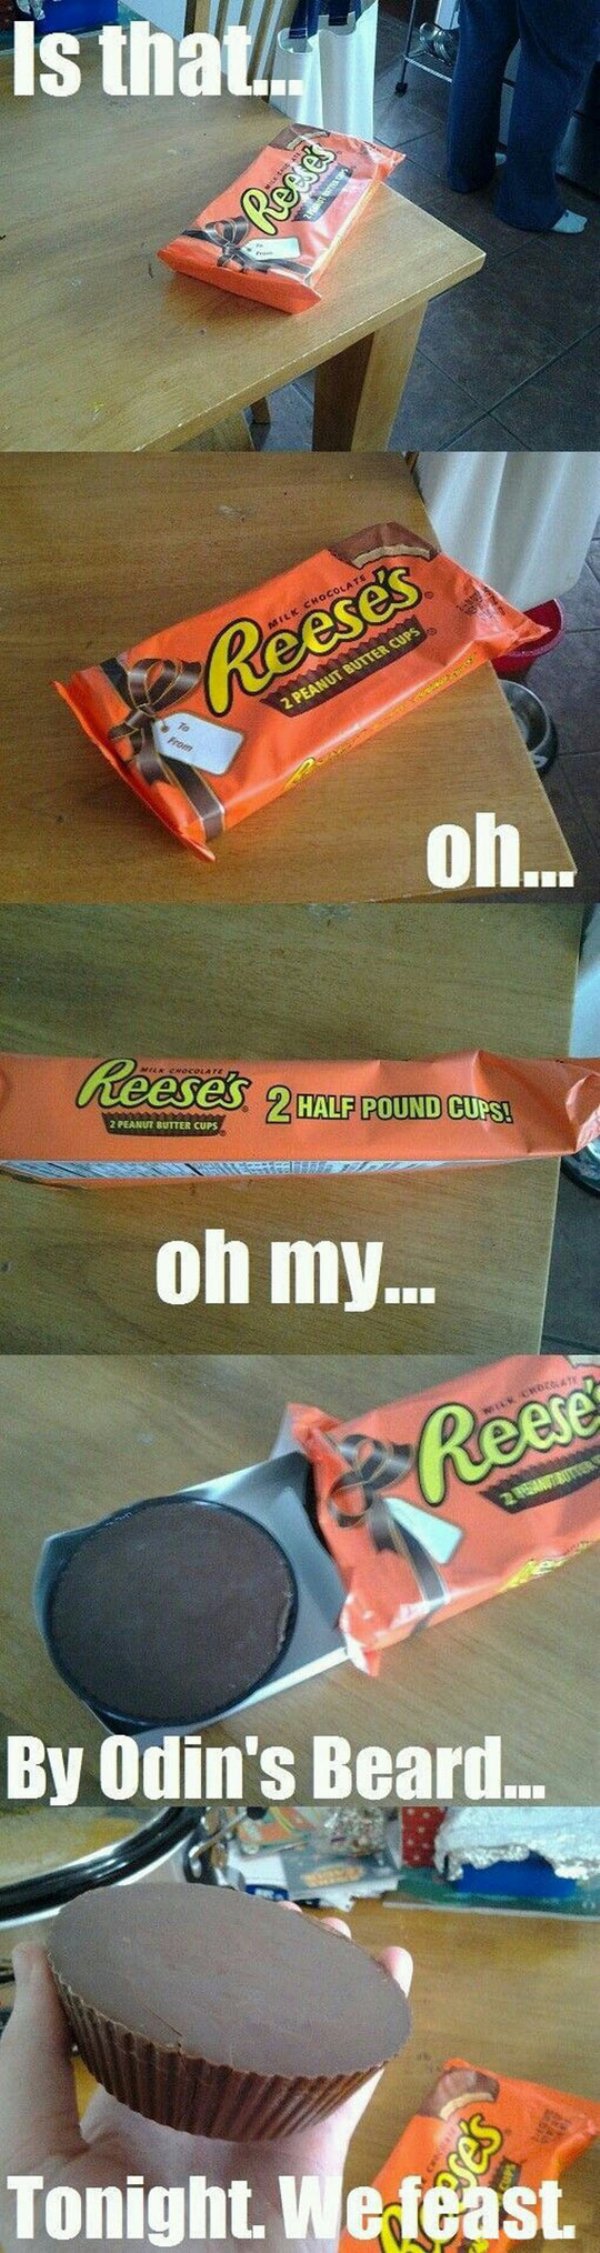 reeses meme - Is that. e Recres Ilk Chocolate Reese's 2 Peanut Butter Cups oh... eneCOLARE heeses 2 Half Pound Curs! 2 Peanut Butter Cups oh my... Reese By Odin's Beard... Tonight. We feast.